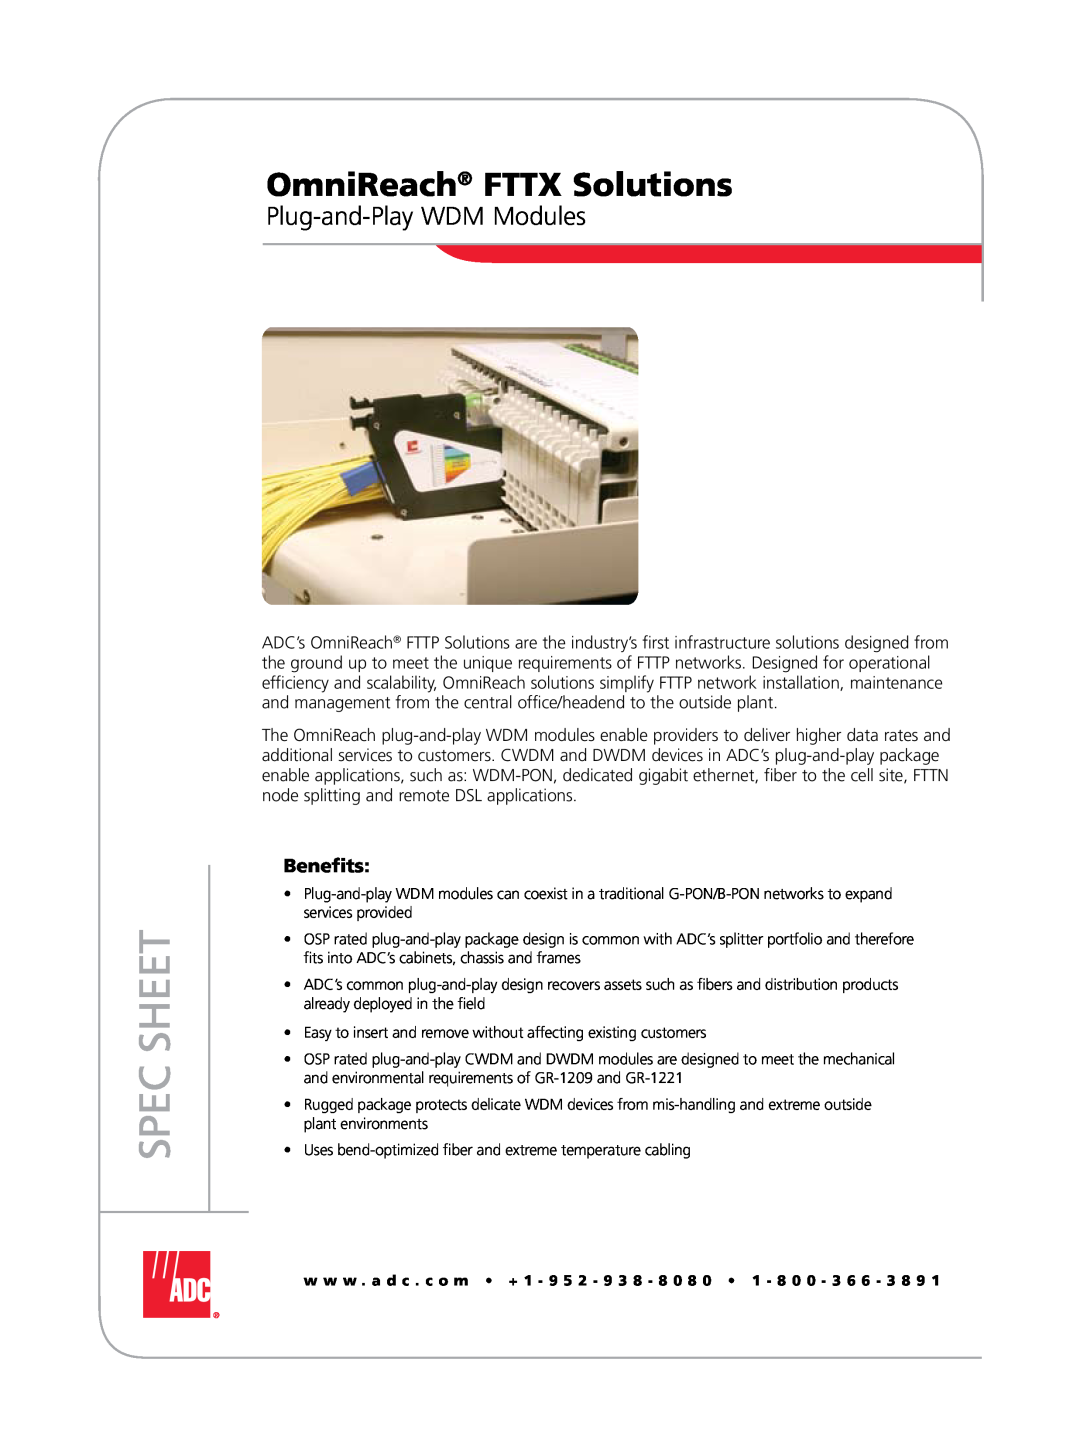 ADC manual OmniReach FTTX Solutions, Plug-and-Play WDM Modules, Spec Sheet, Benefits 